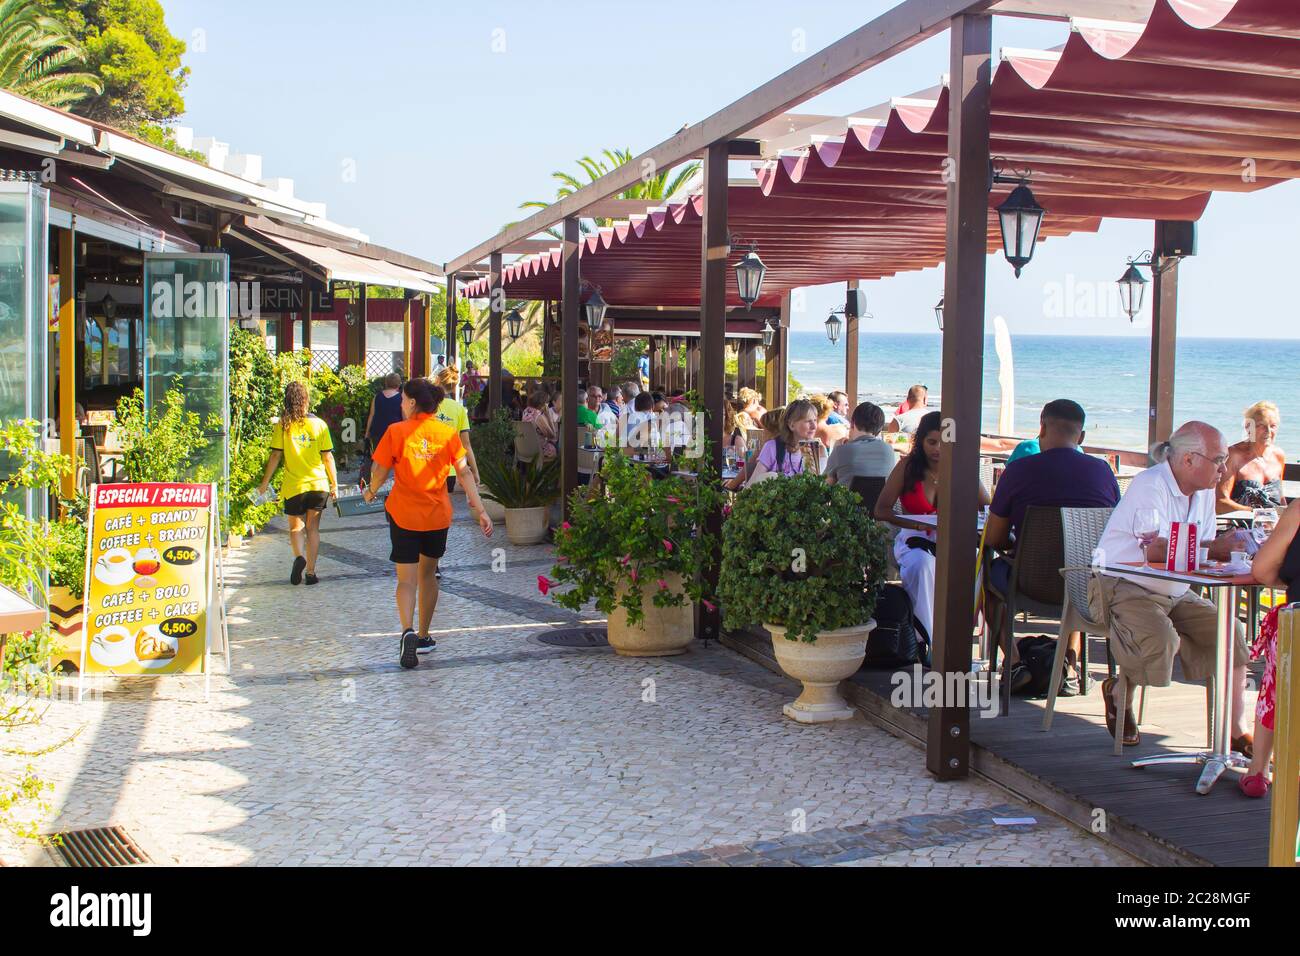 3 October 2018 Patrons dining out in the terraced walkway restaurant overlooking Prai da Oura Beach in Albuferia Portugal on a beautiful hot afternoon Stock Photo